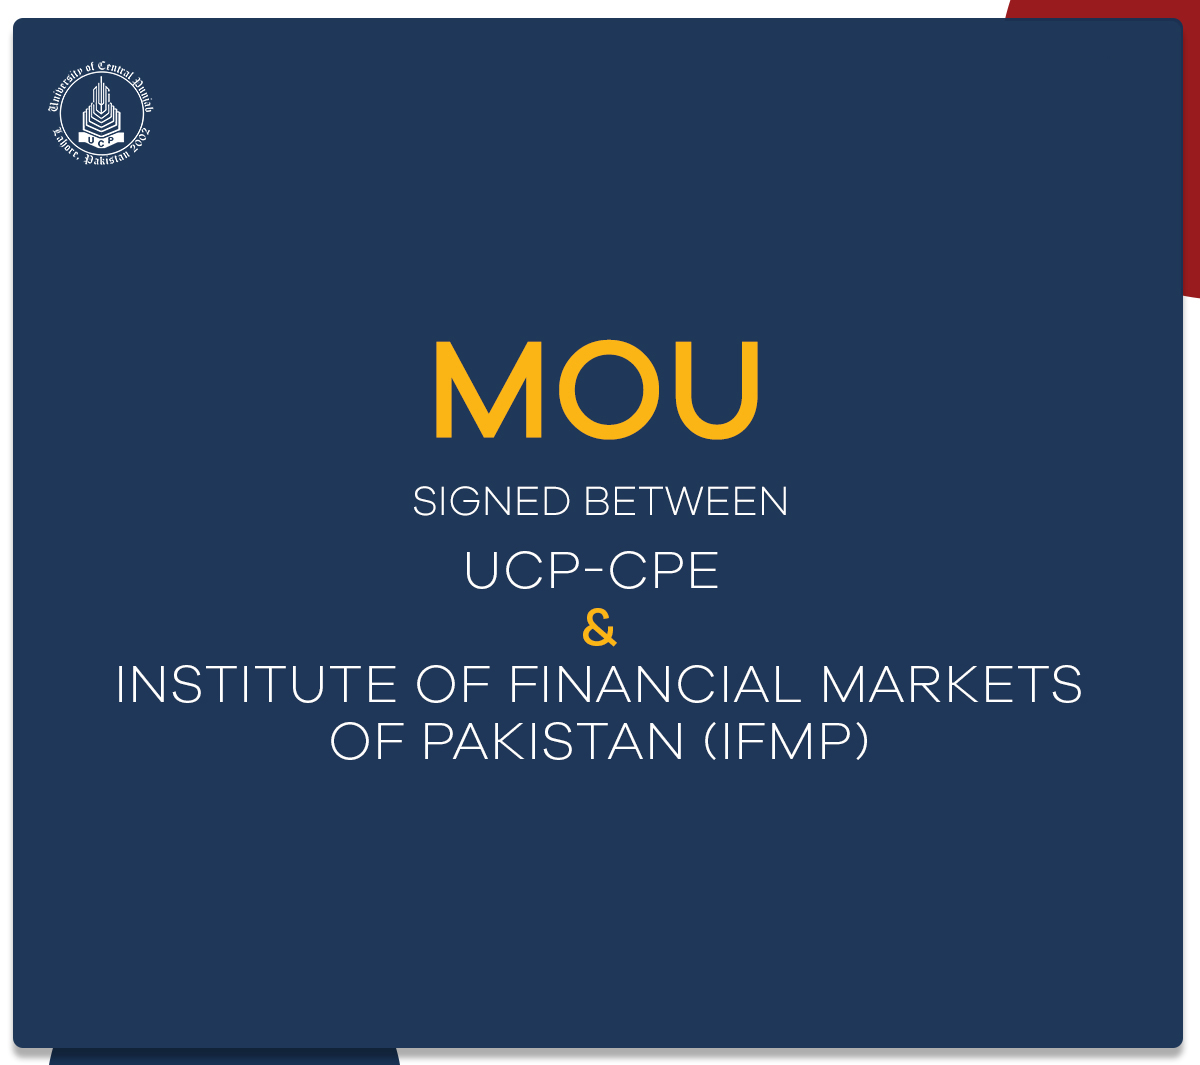 MoU signed by UCP-CPE & Institute of Financial Markets of Pakistan (IFMP)